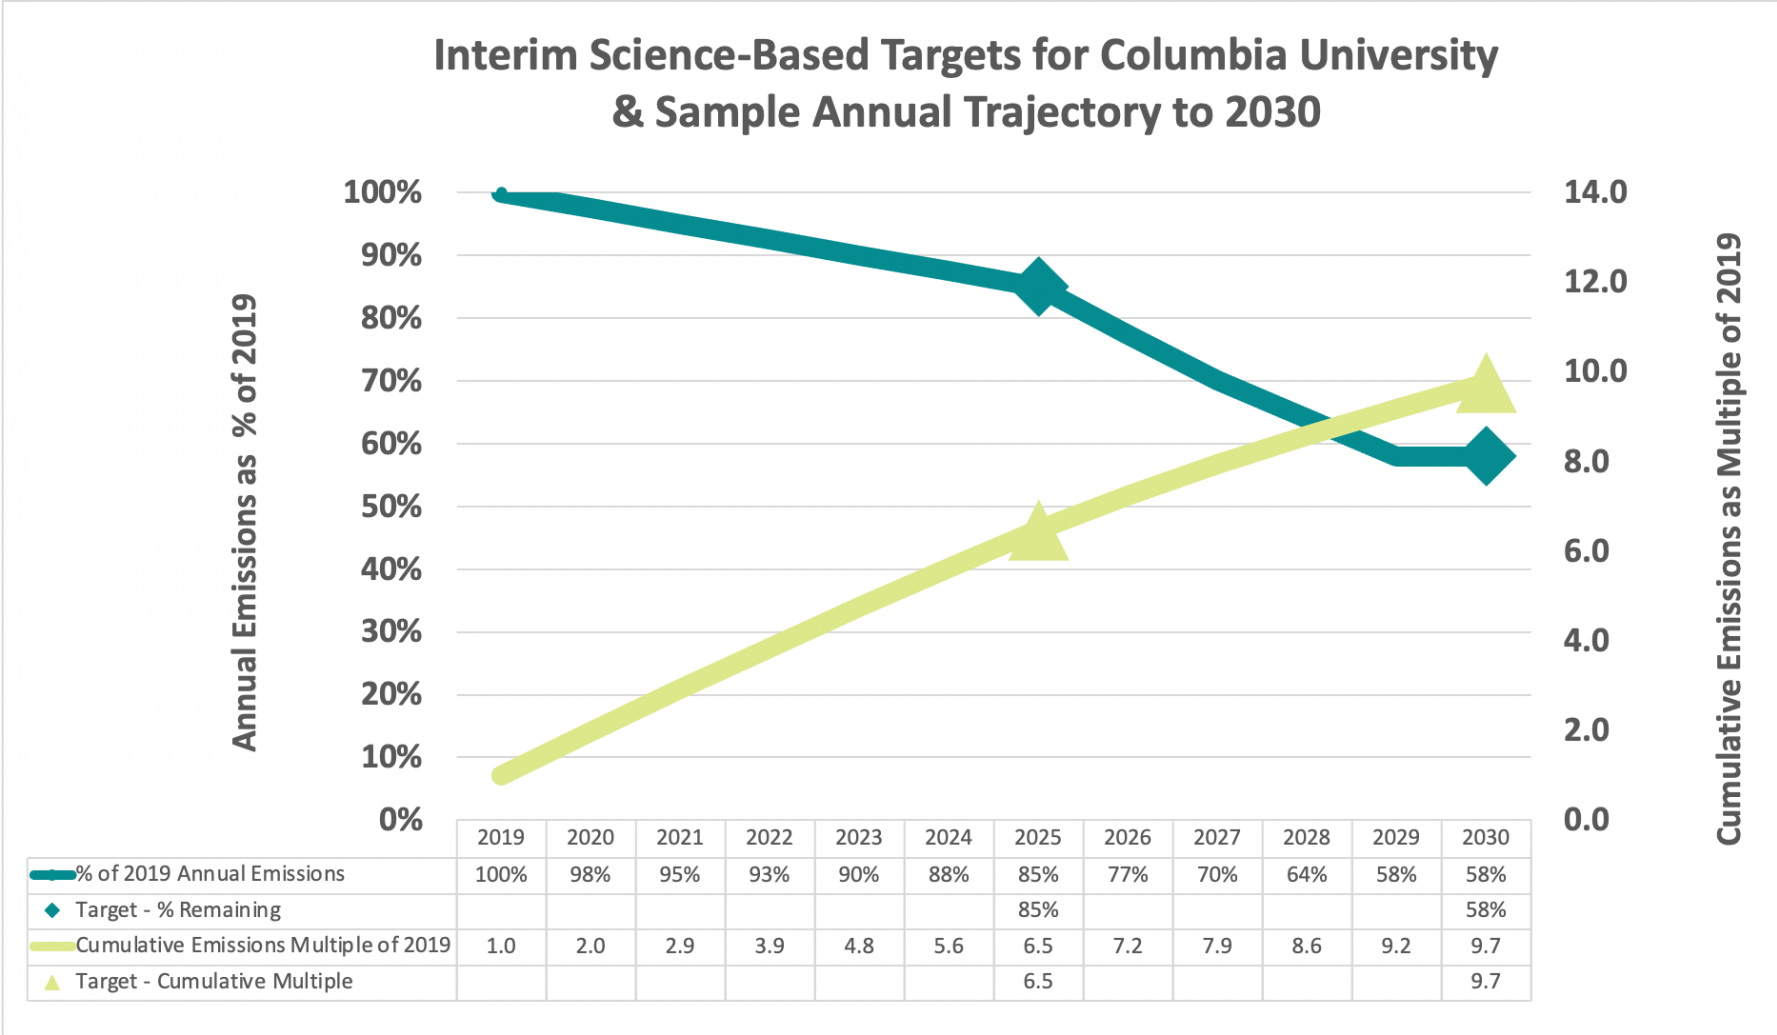 Image Description: Interim Science-Based Targets for Columbia University & Sample Annual Trajectory to 2030